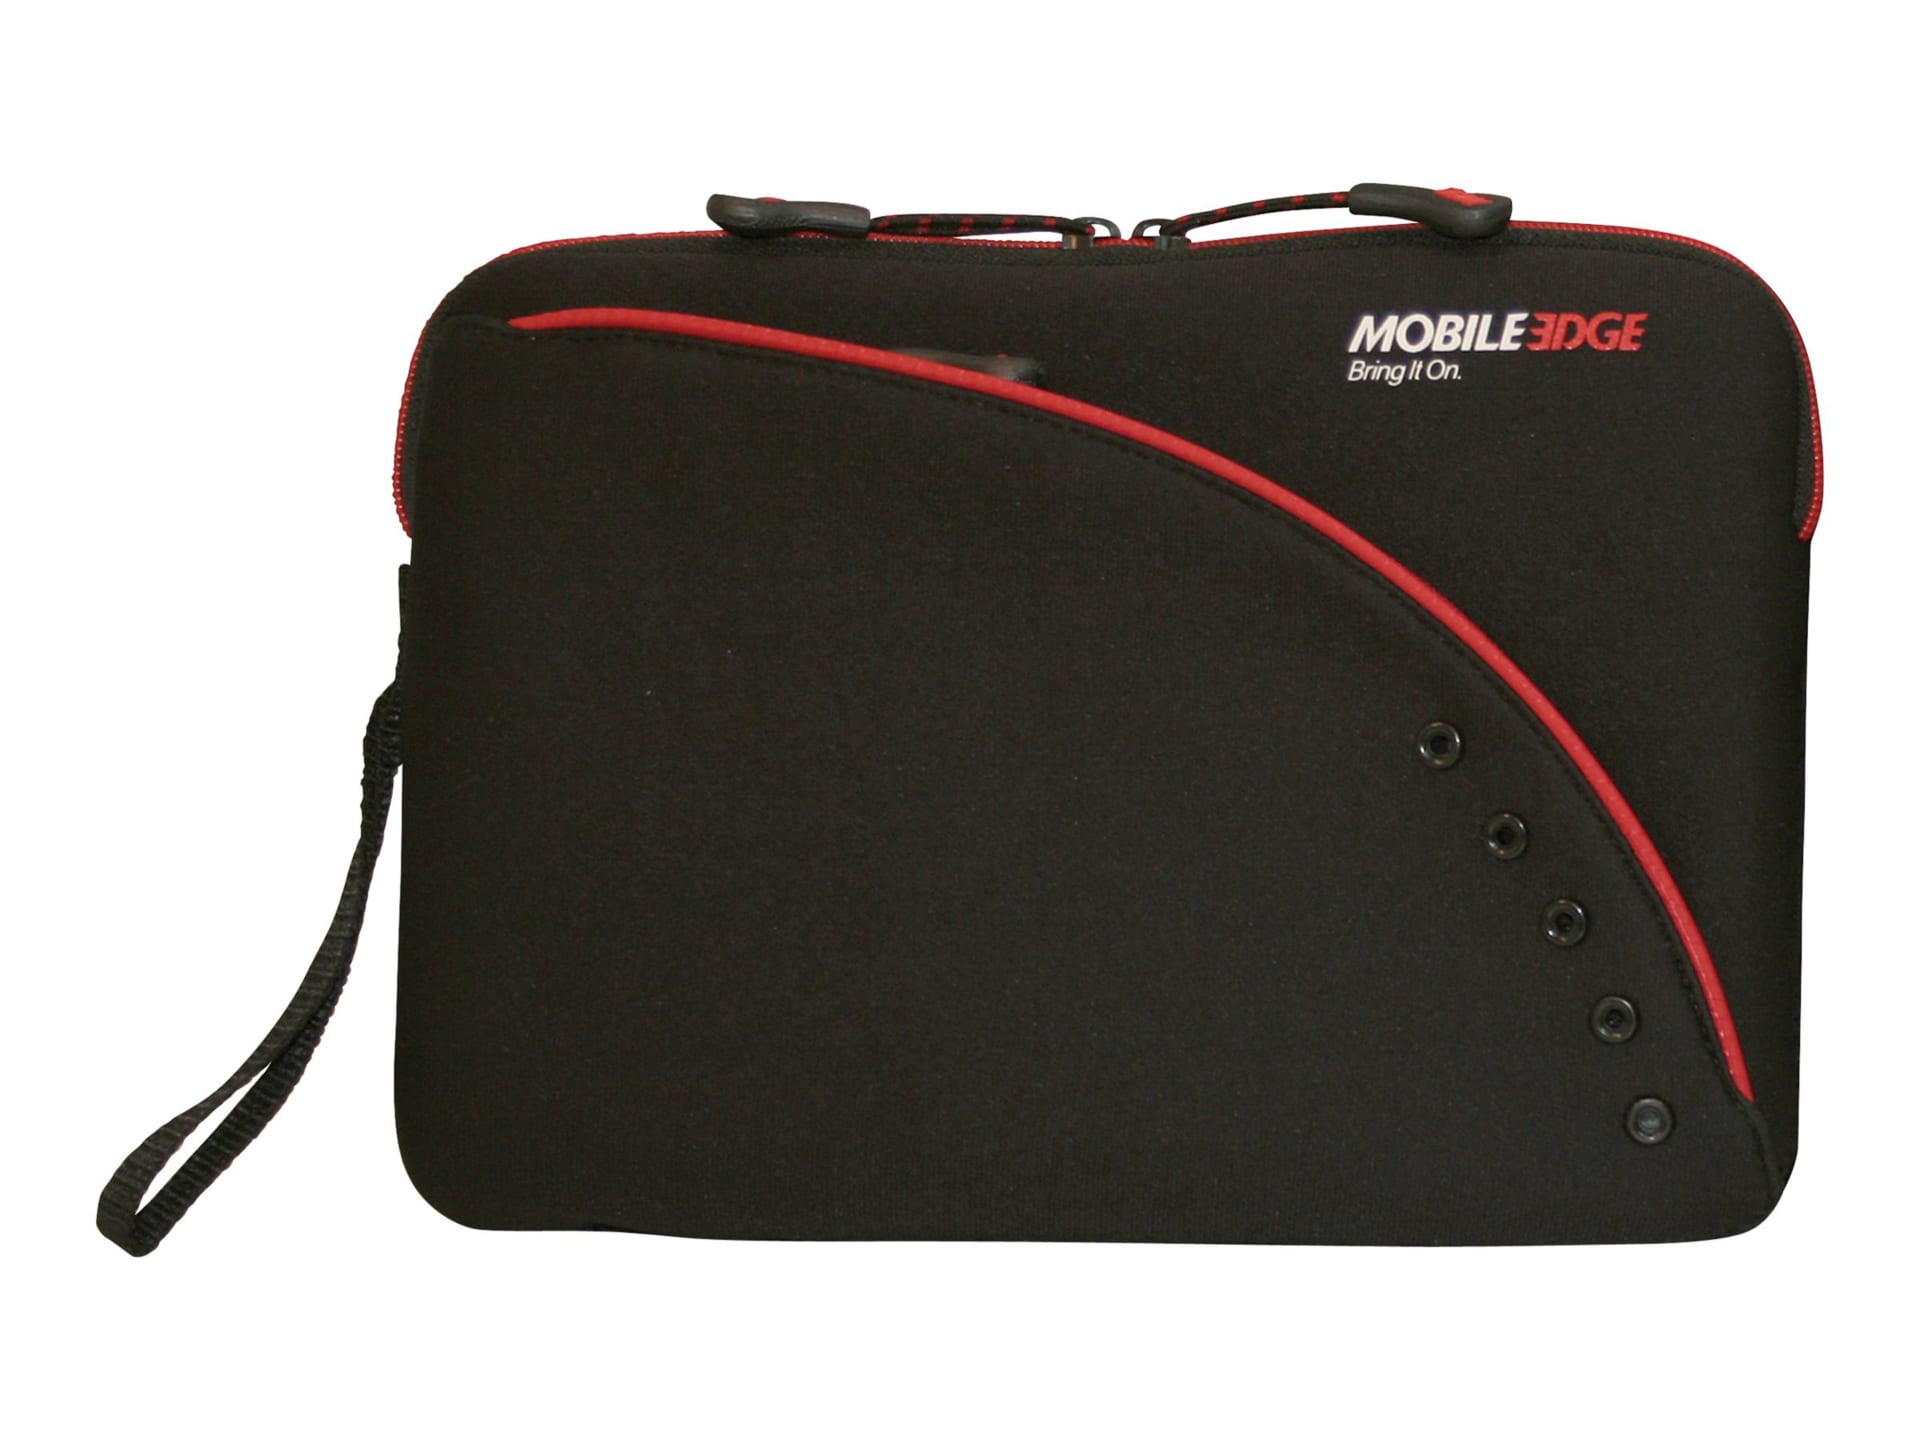 Mobile Edge 7" to 8.9" Tablet Neoprene Sleeve - protective sleeve for table